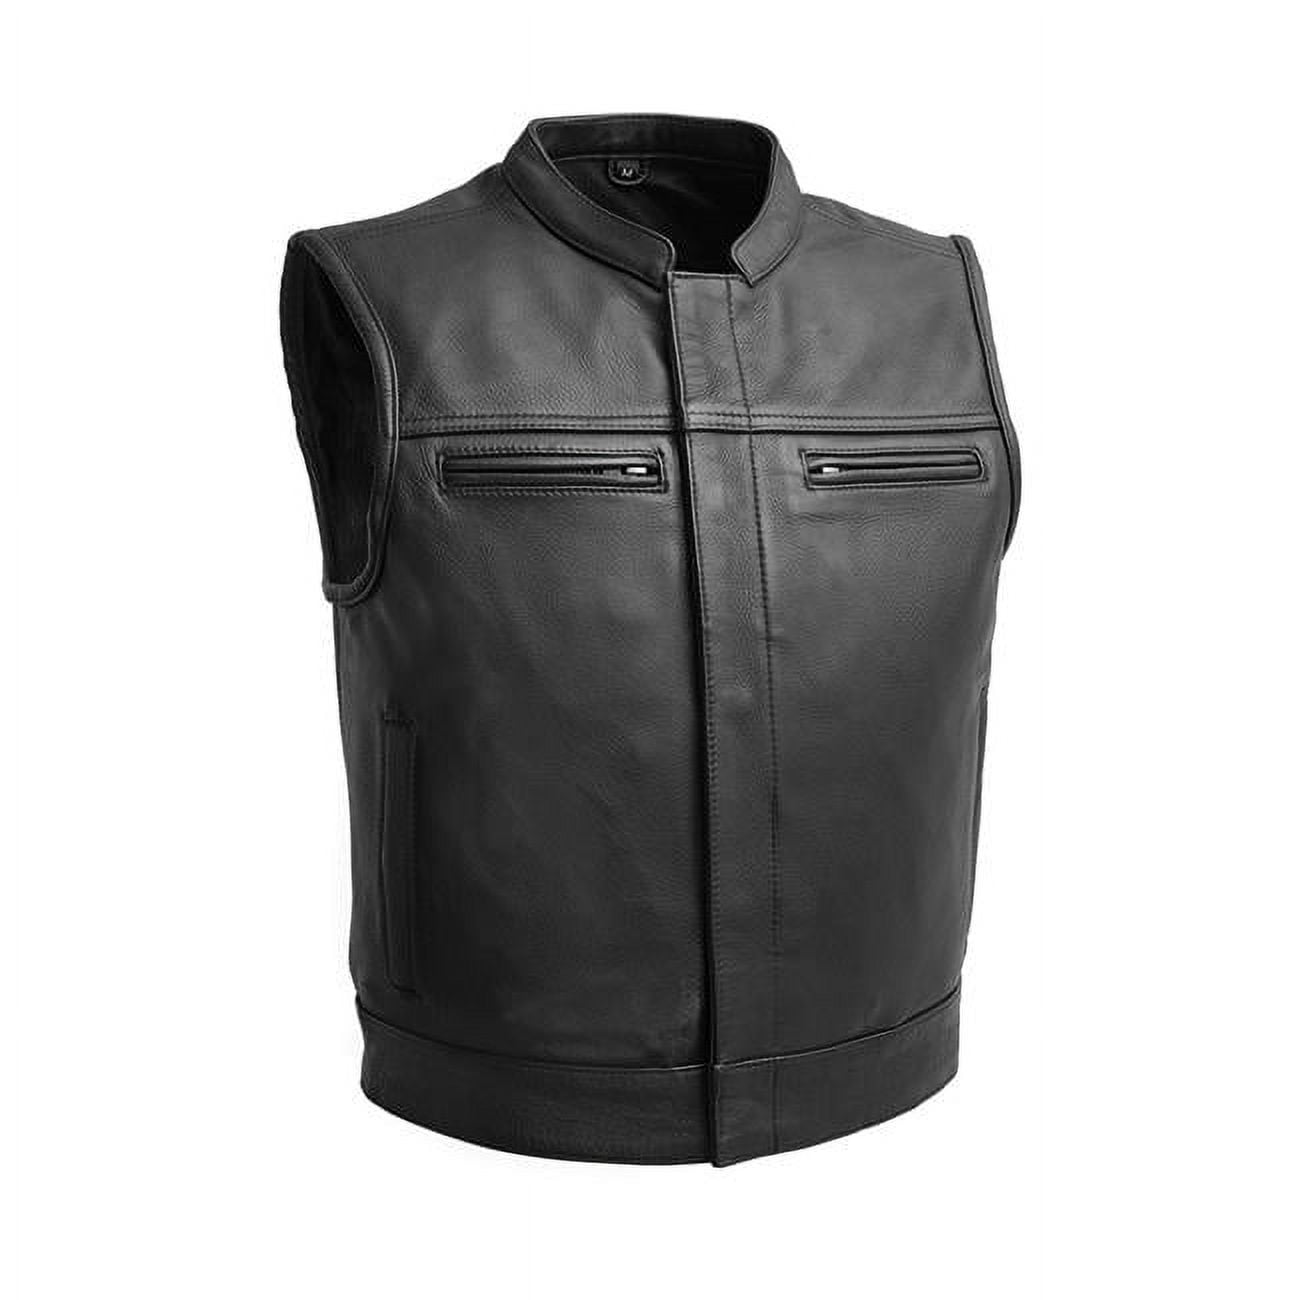 Full Motorcycle Leather Race Suit